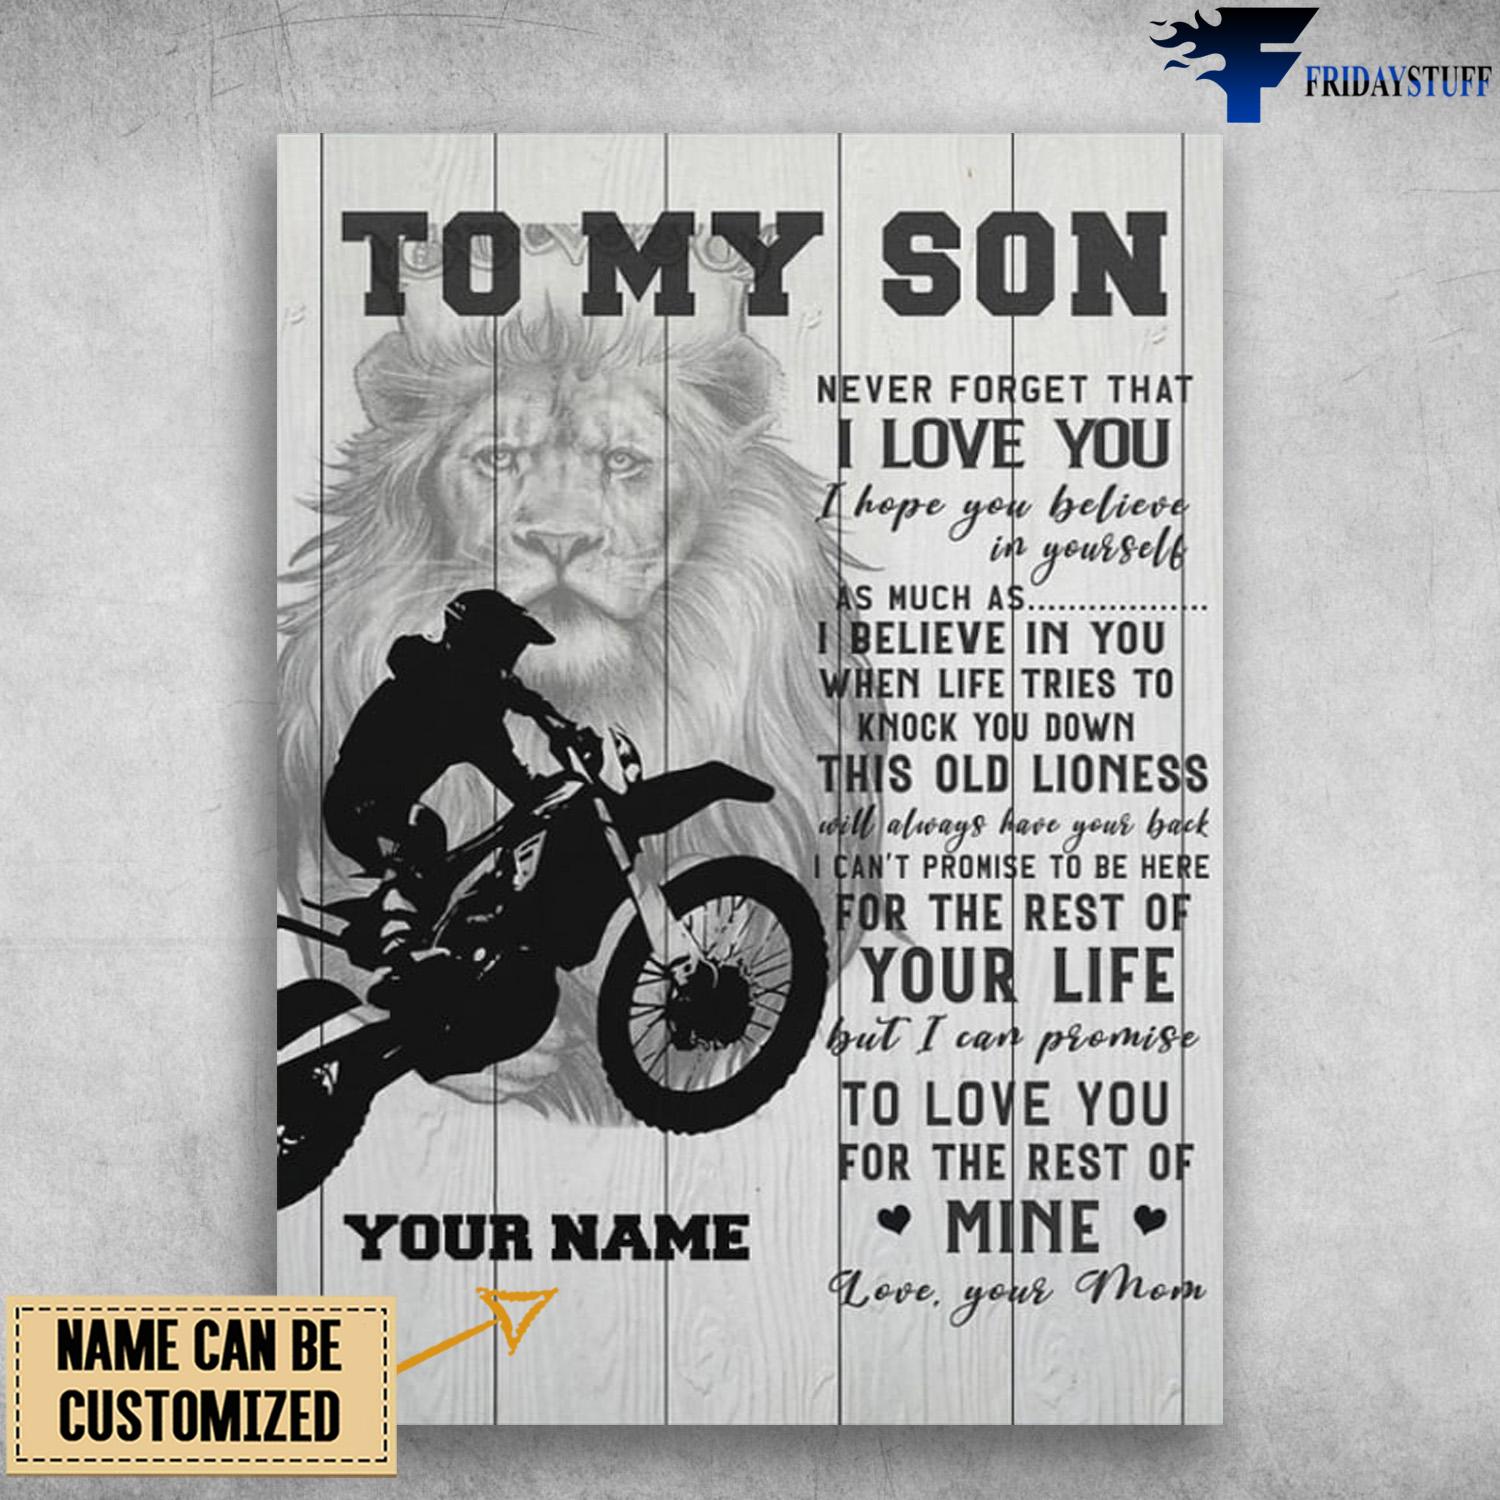 Motorcycle Man, Mom And Son, To My Son, Never Forget That, I Love You, I Hope You Believe In Yourself, As Much As, I Believe In You, When life Tries To Knock You Down, This Old Lioness